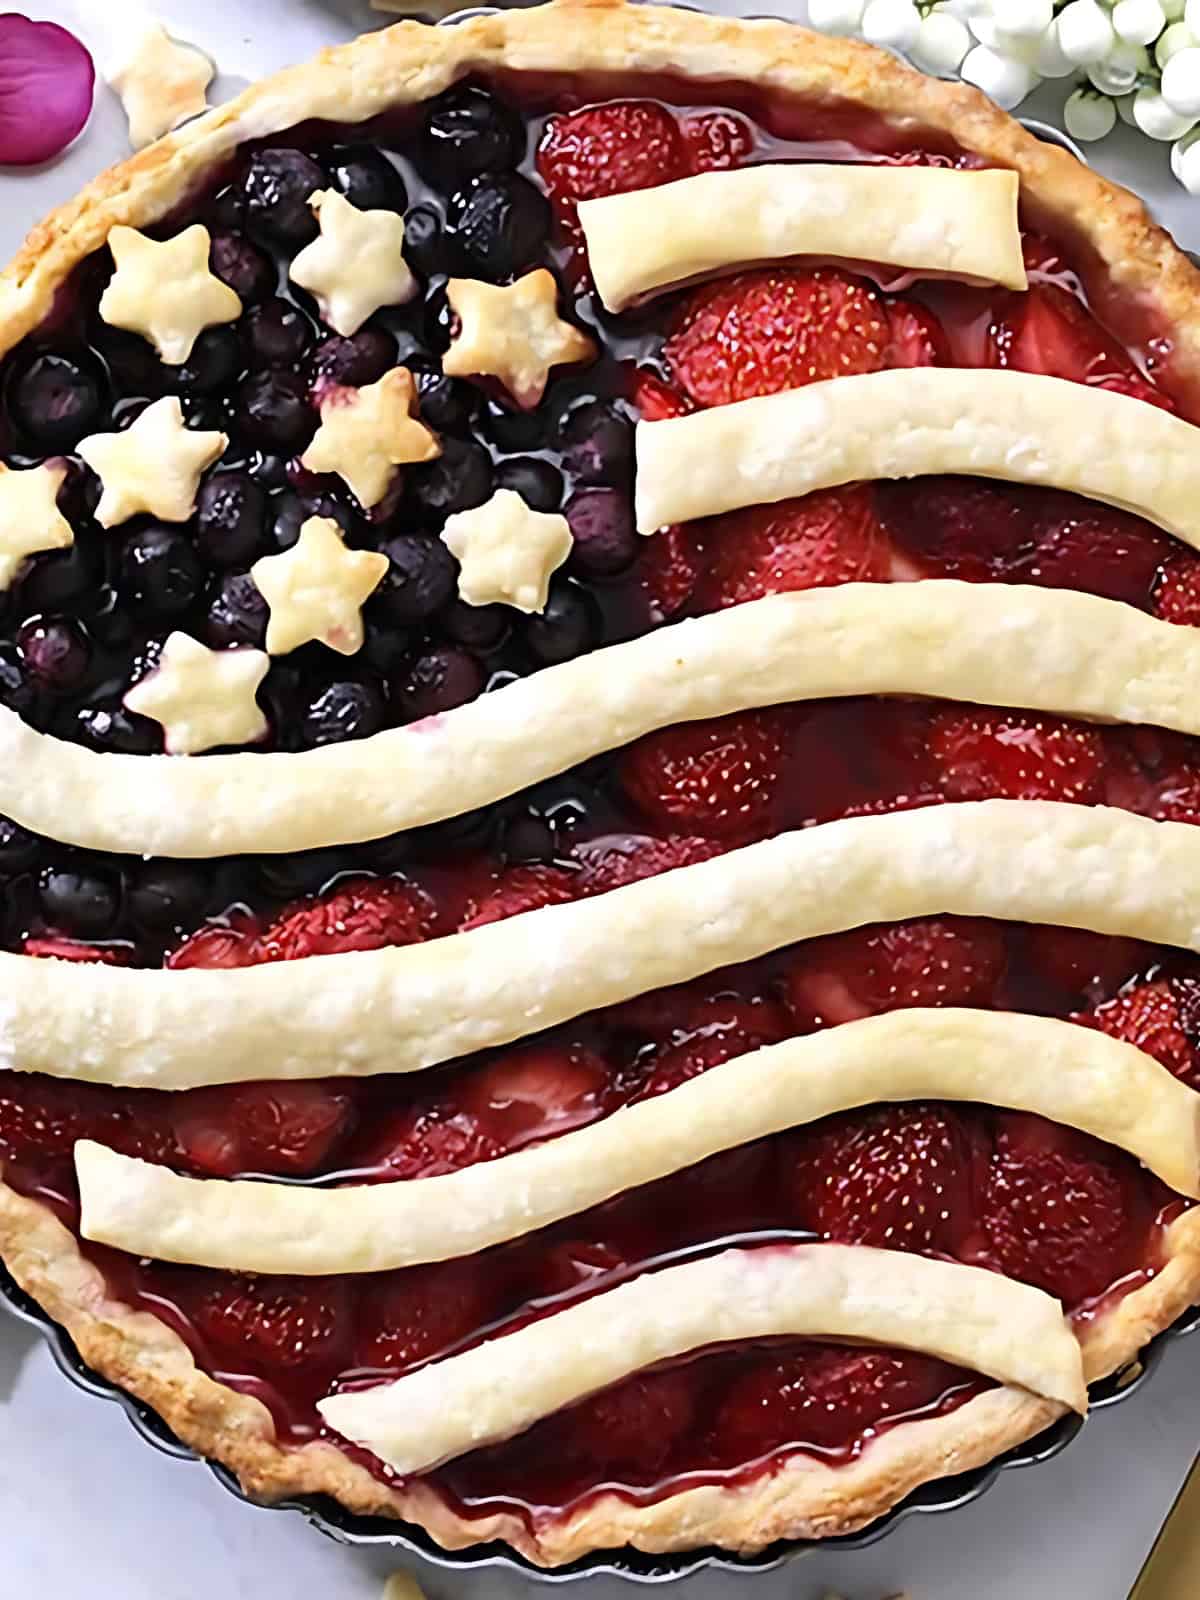 American flag themed pie topped with berries.